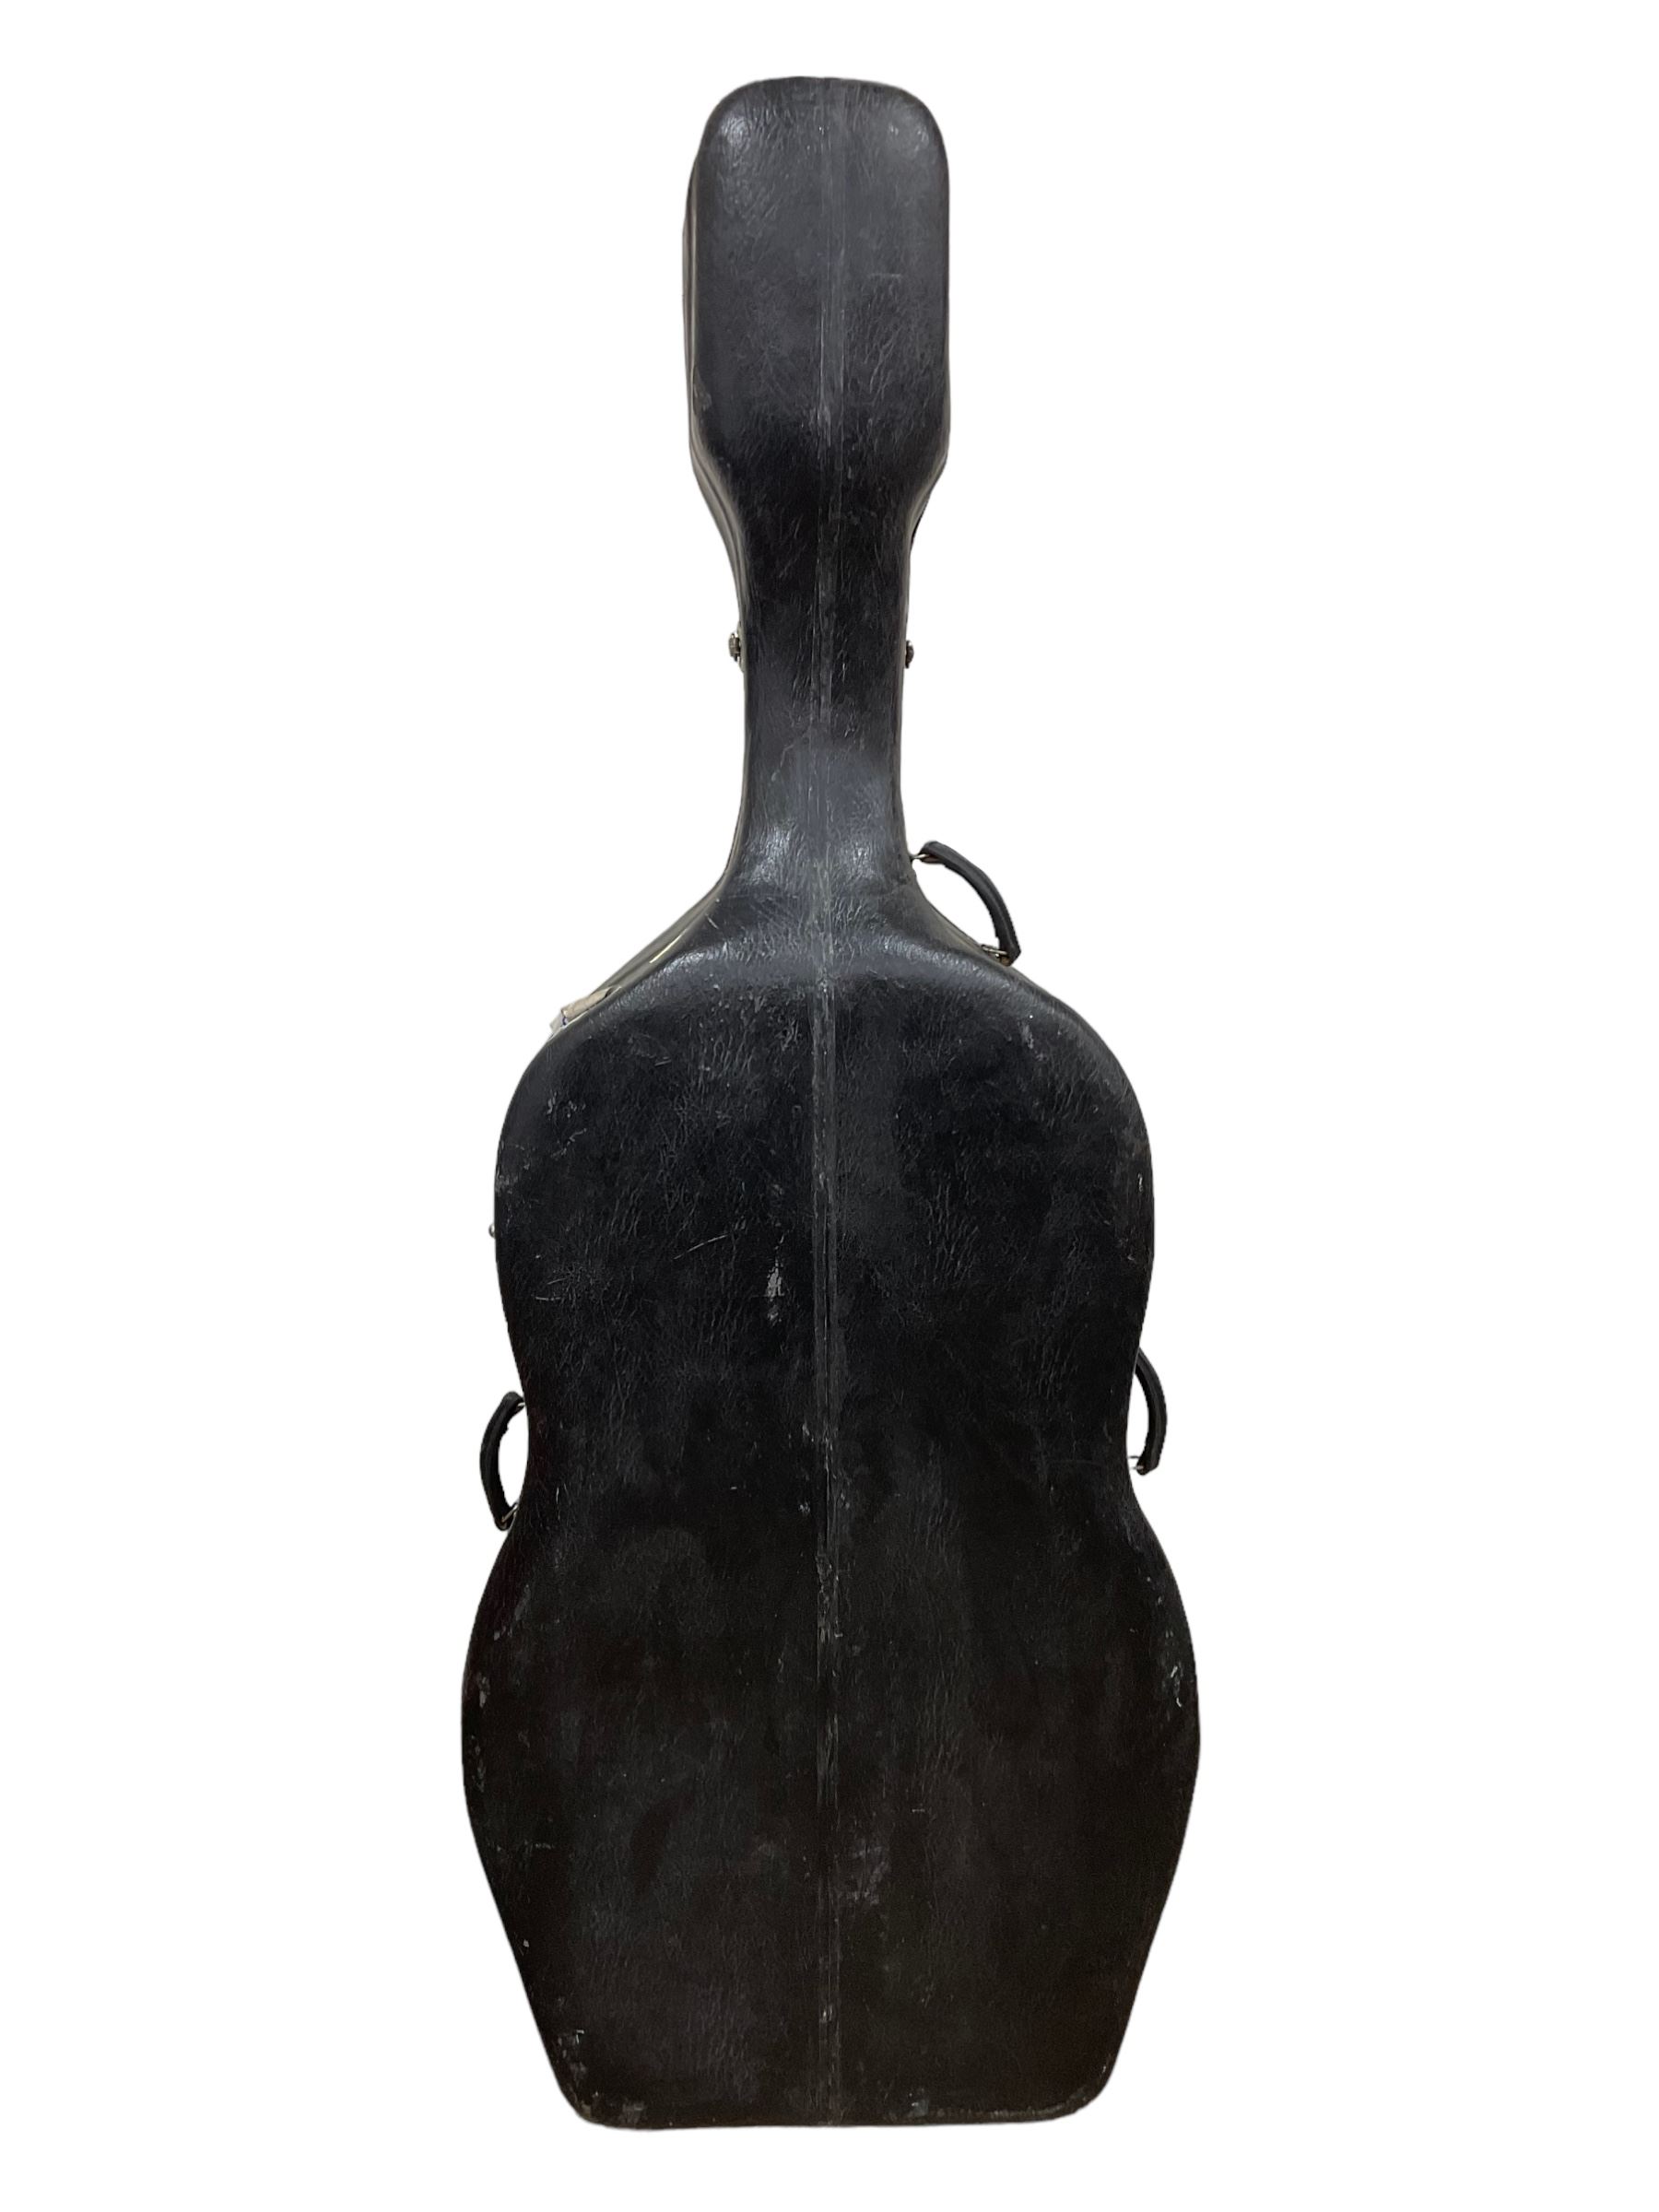 Velvet lined fibreglass double bass case H200cm - THIS LOT IS TO BE COLLECTED BY APPOINTMENT FROM DU - Image 7 of 7